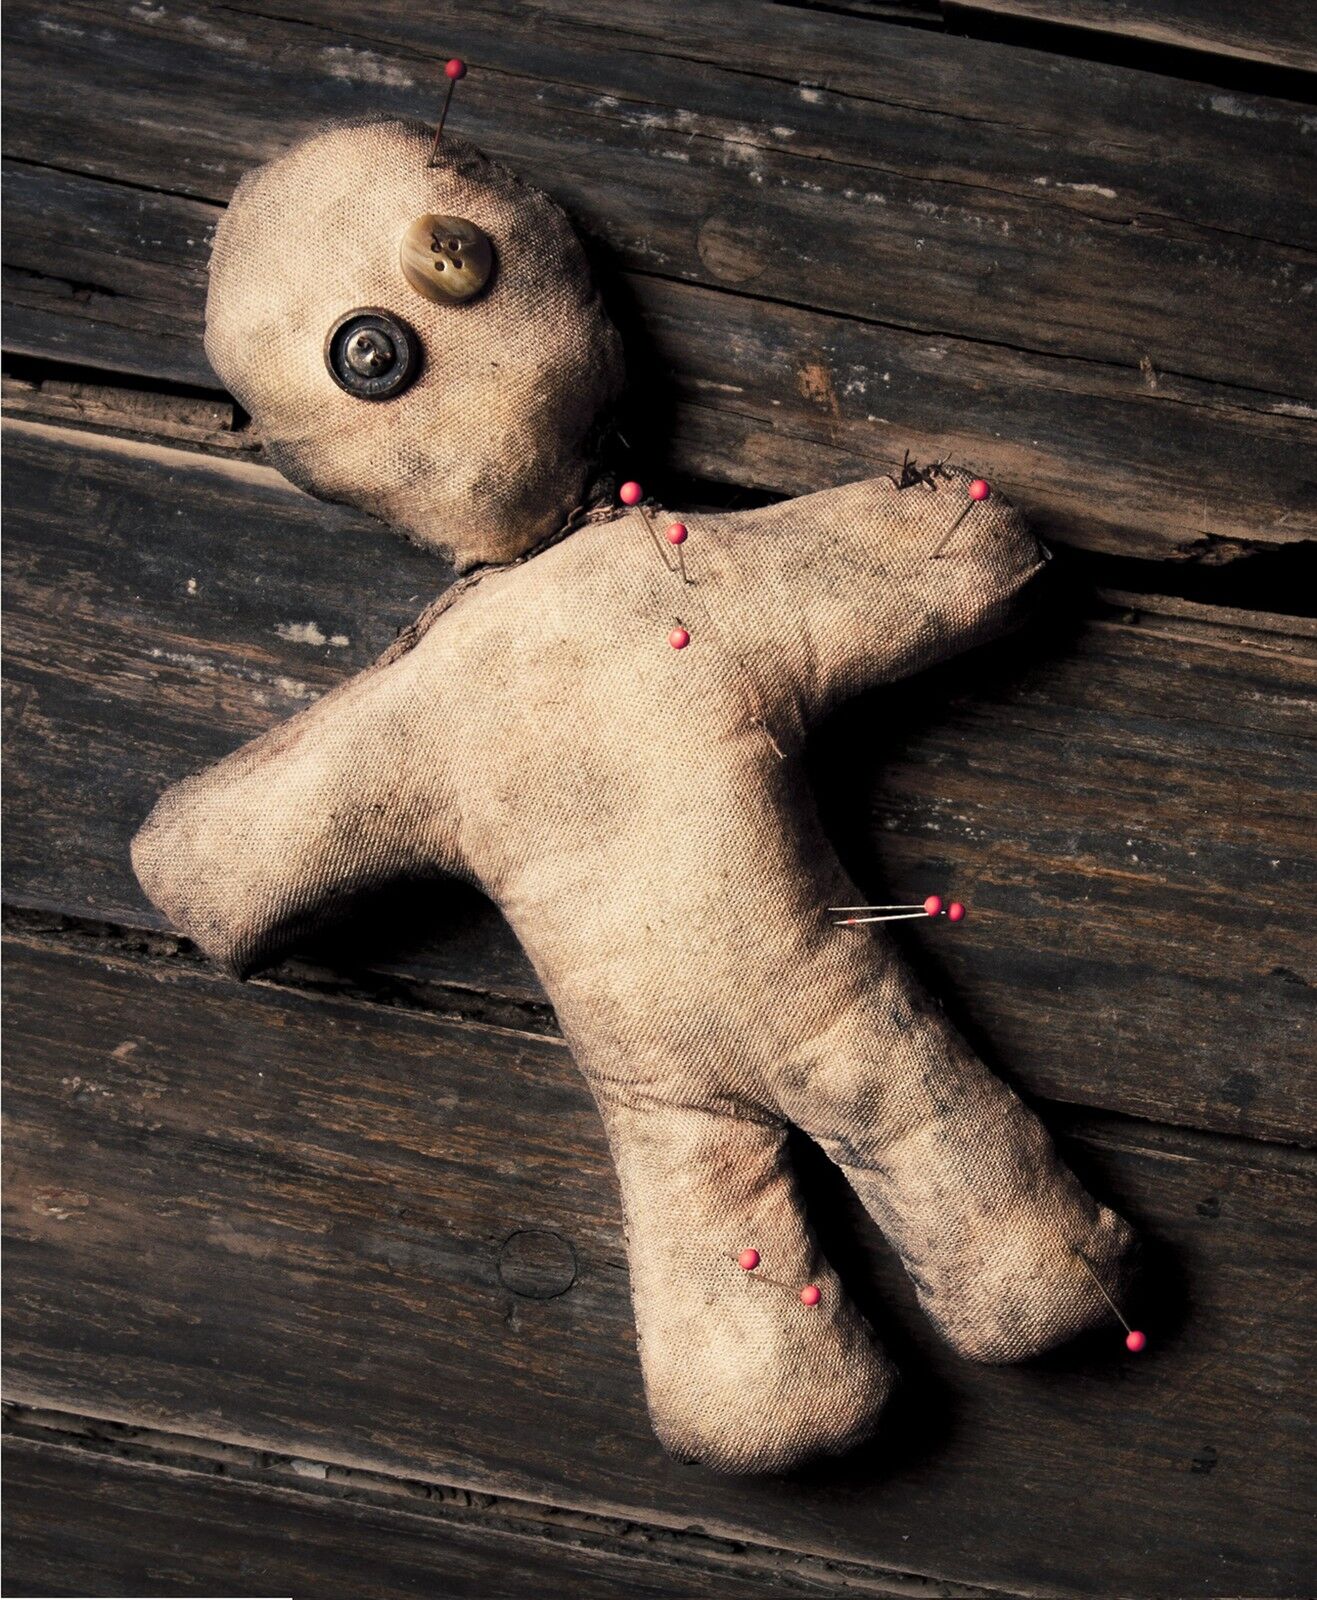 How to Make a Voodoo Doll Black Magic Zombie Supernatural Spells Curses on CD